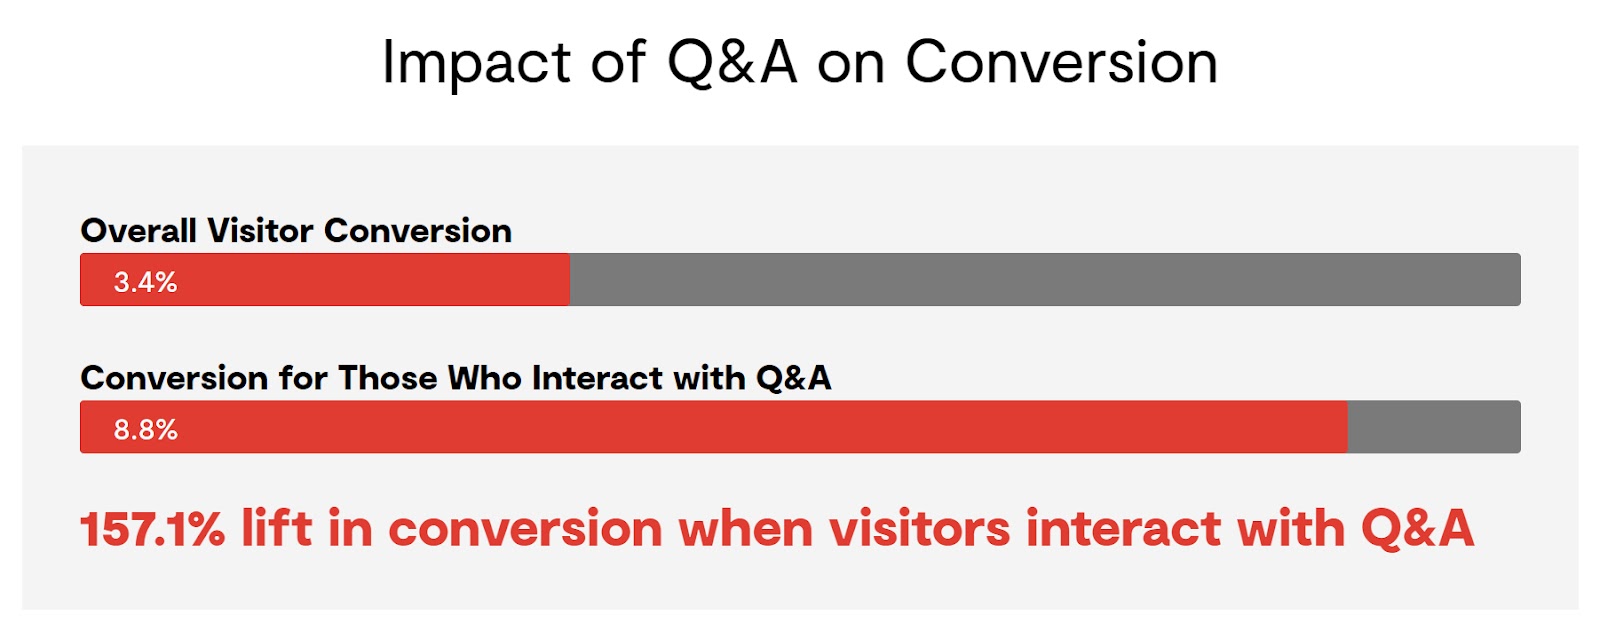 Power Reviews' graph showing the impact of Q&A on conversion